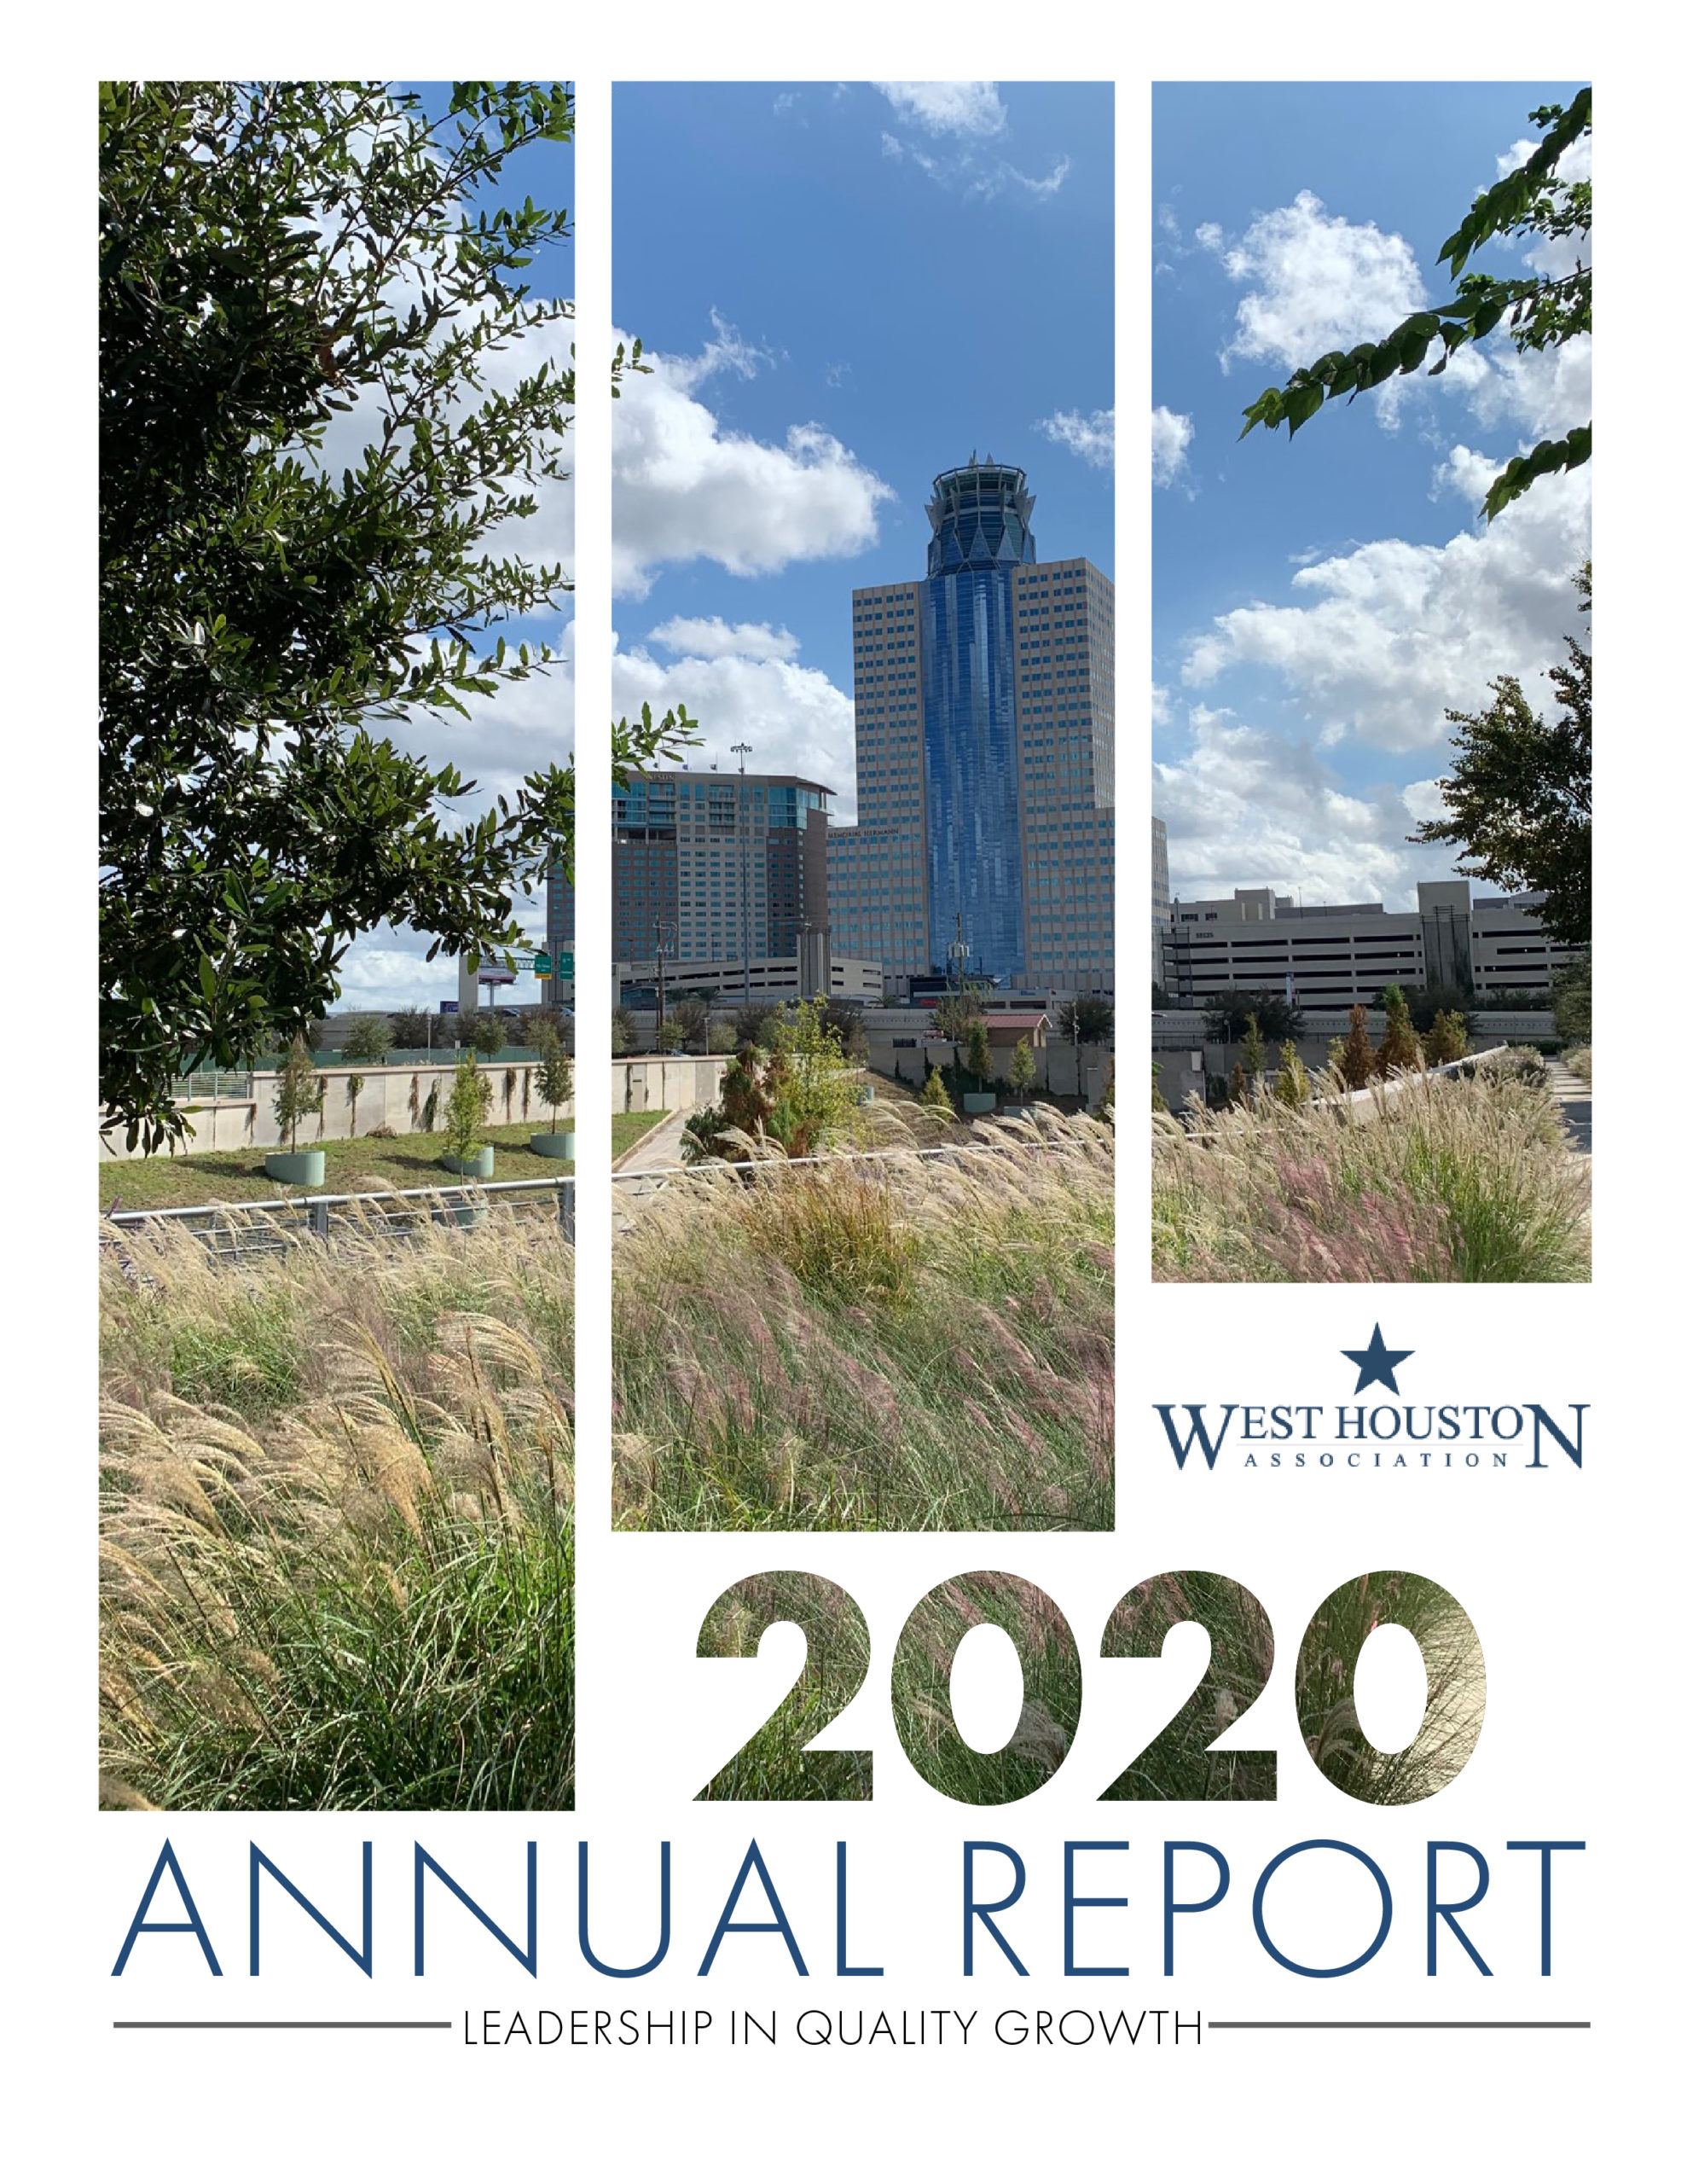 Our 2020 Annual Report is HERE!